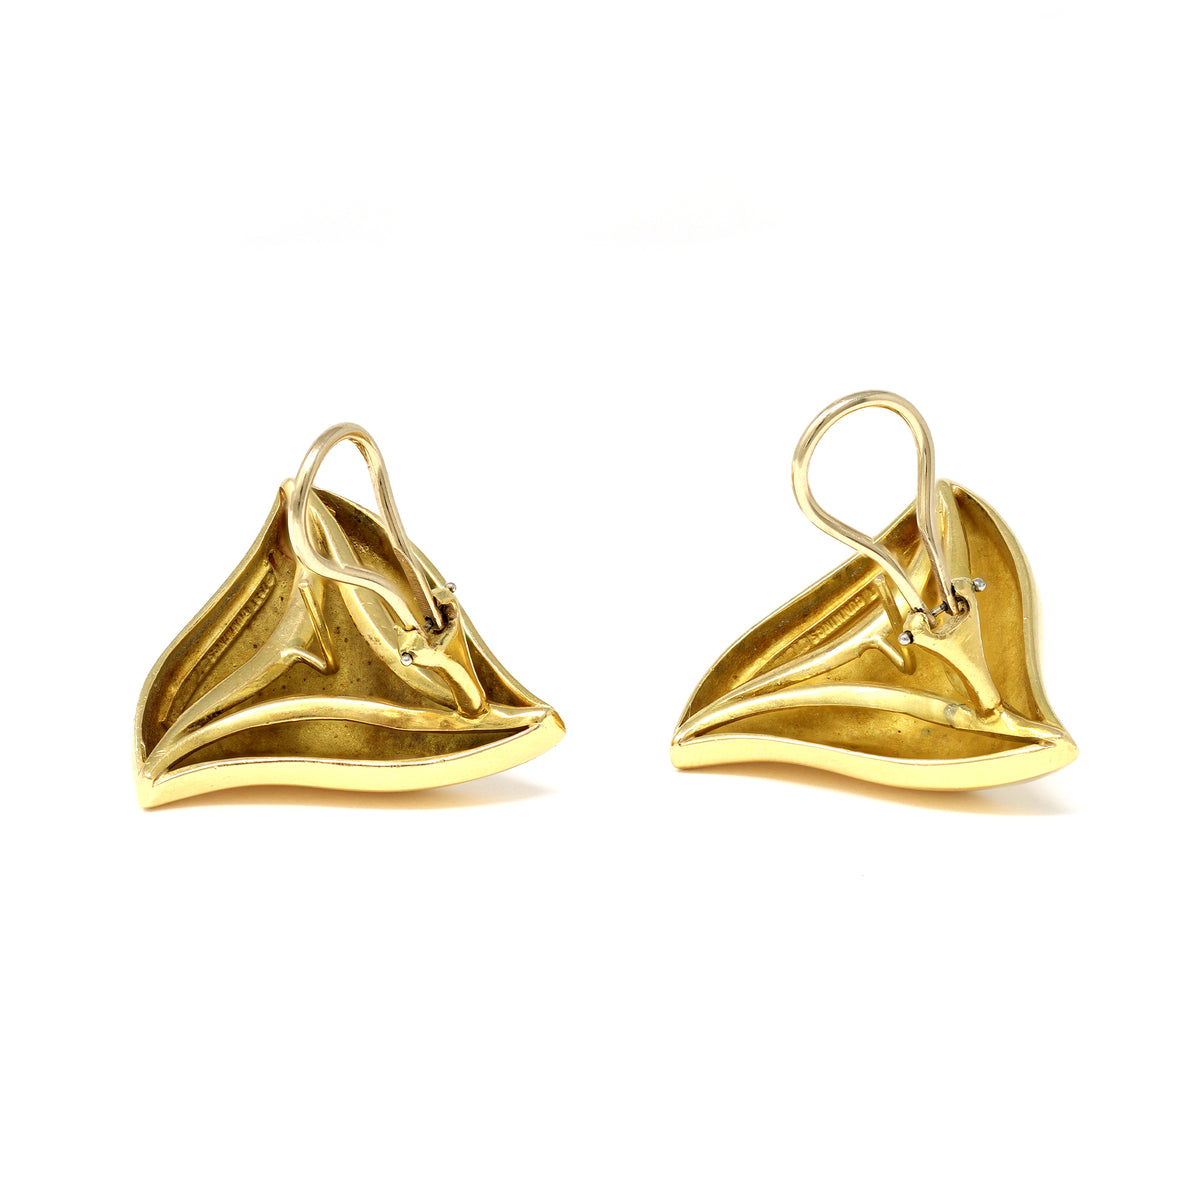 Signed Angela Cummings Pyramidal Clip On Earrings in 18 Karat Yellow Gold back view